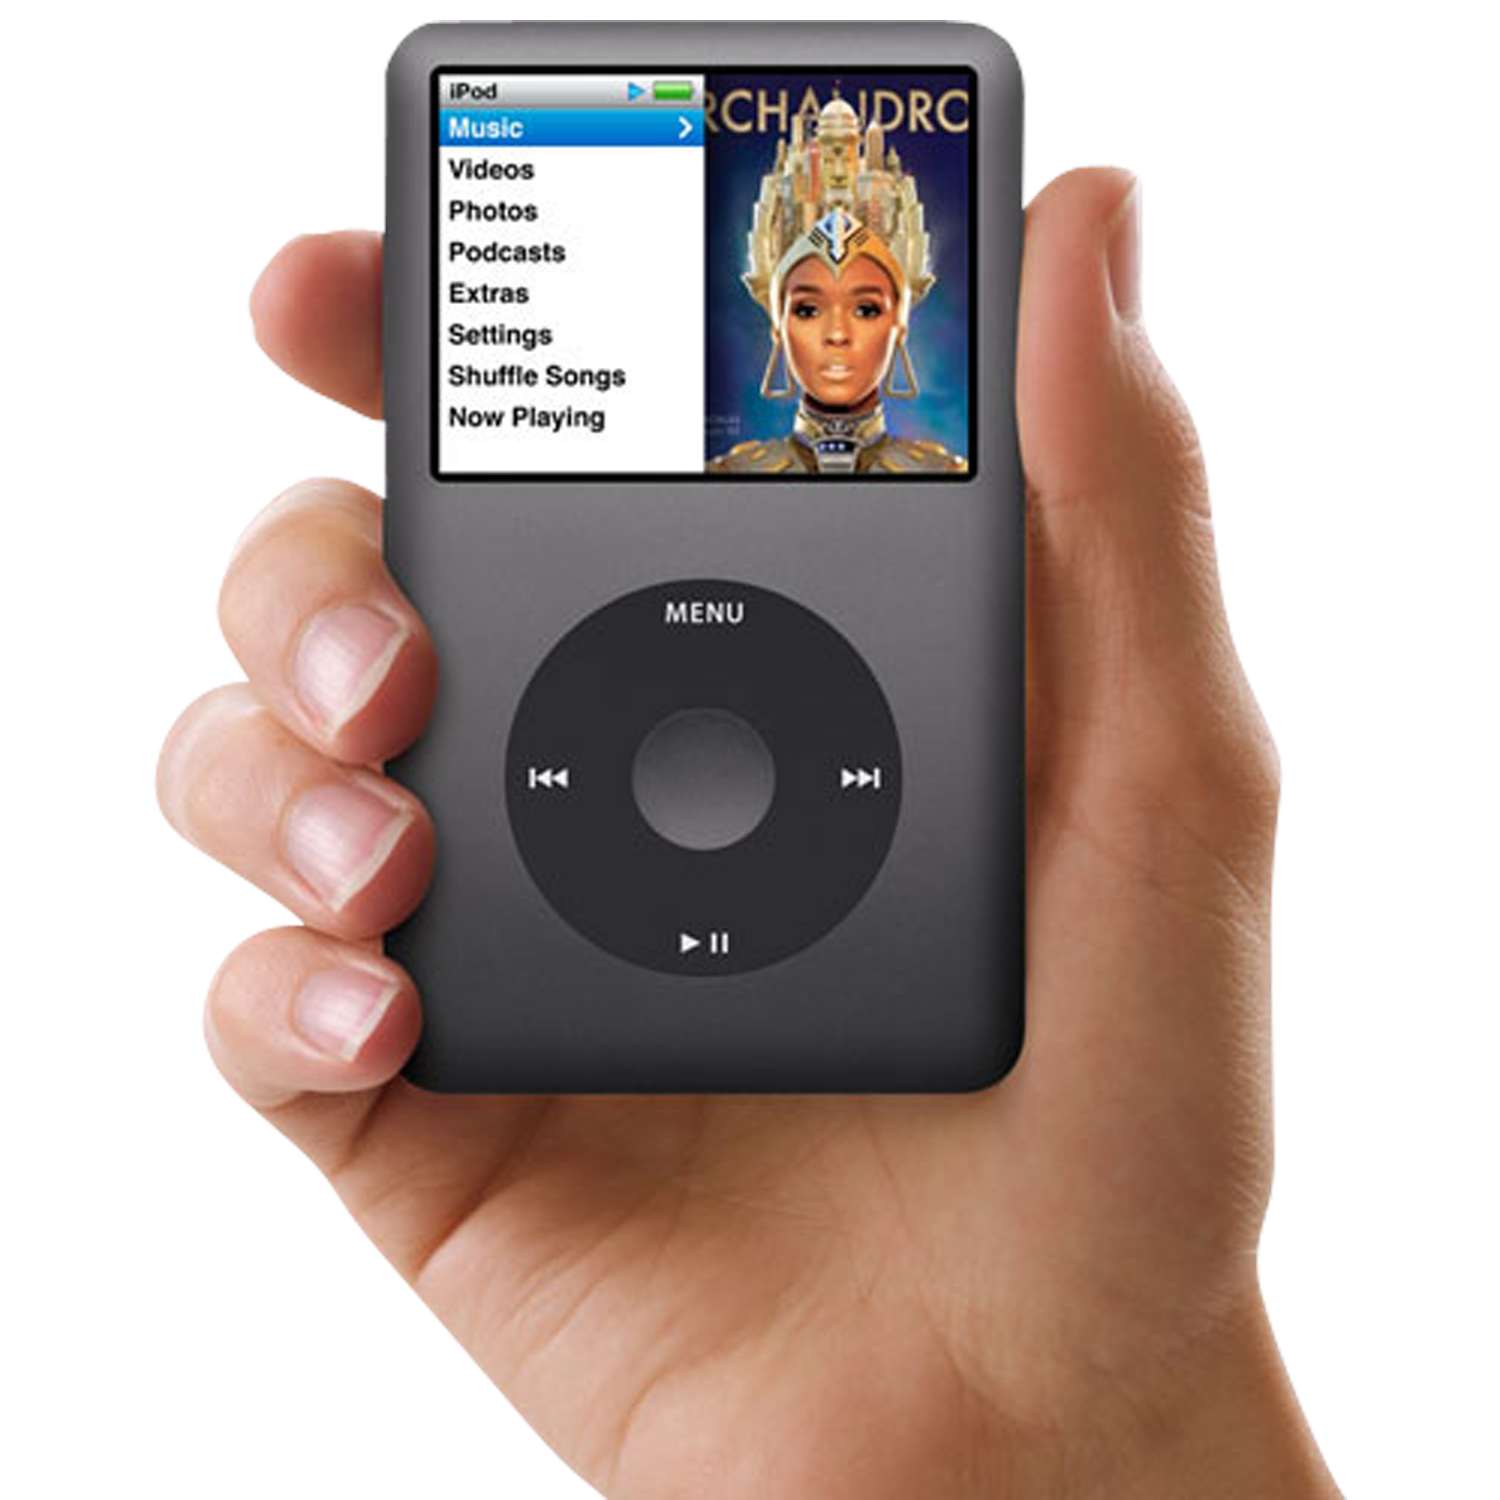 Apple iPod classic 160 GB Black (7th Generation) NEWEST MODEL Review